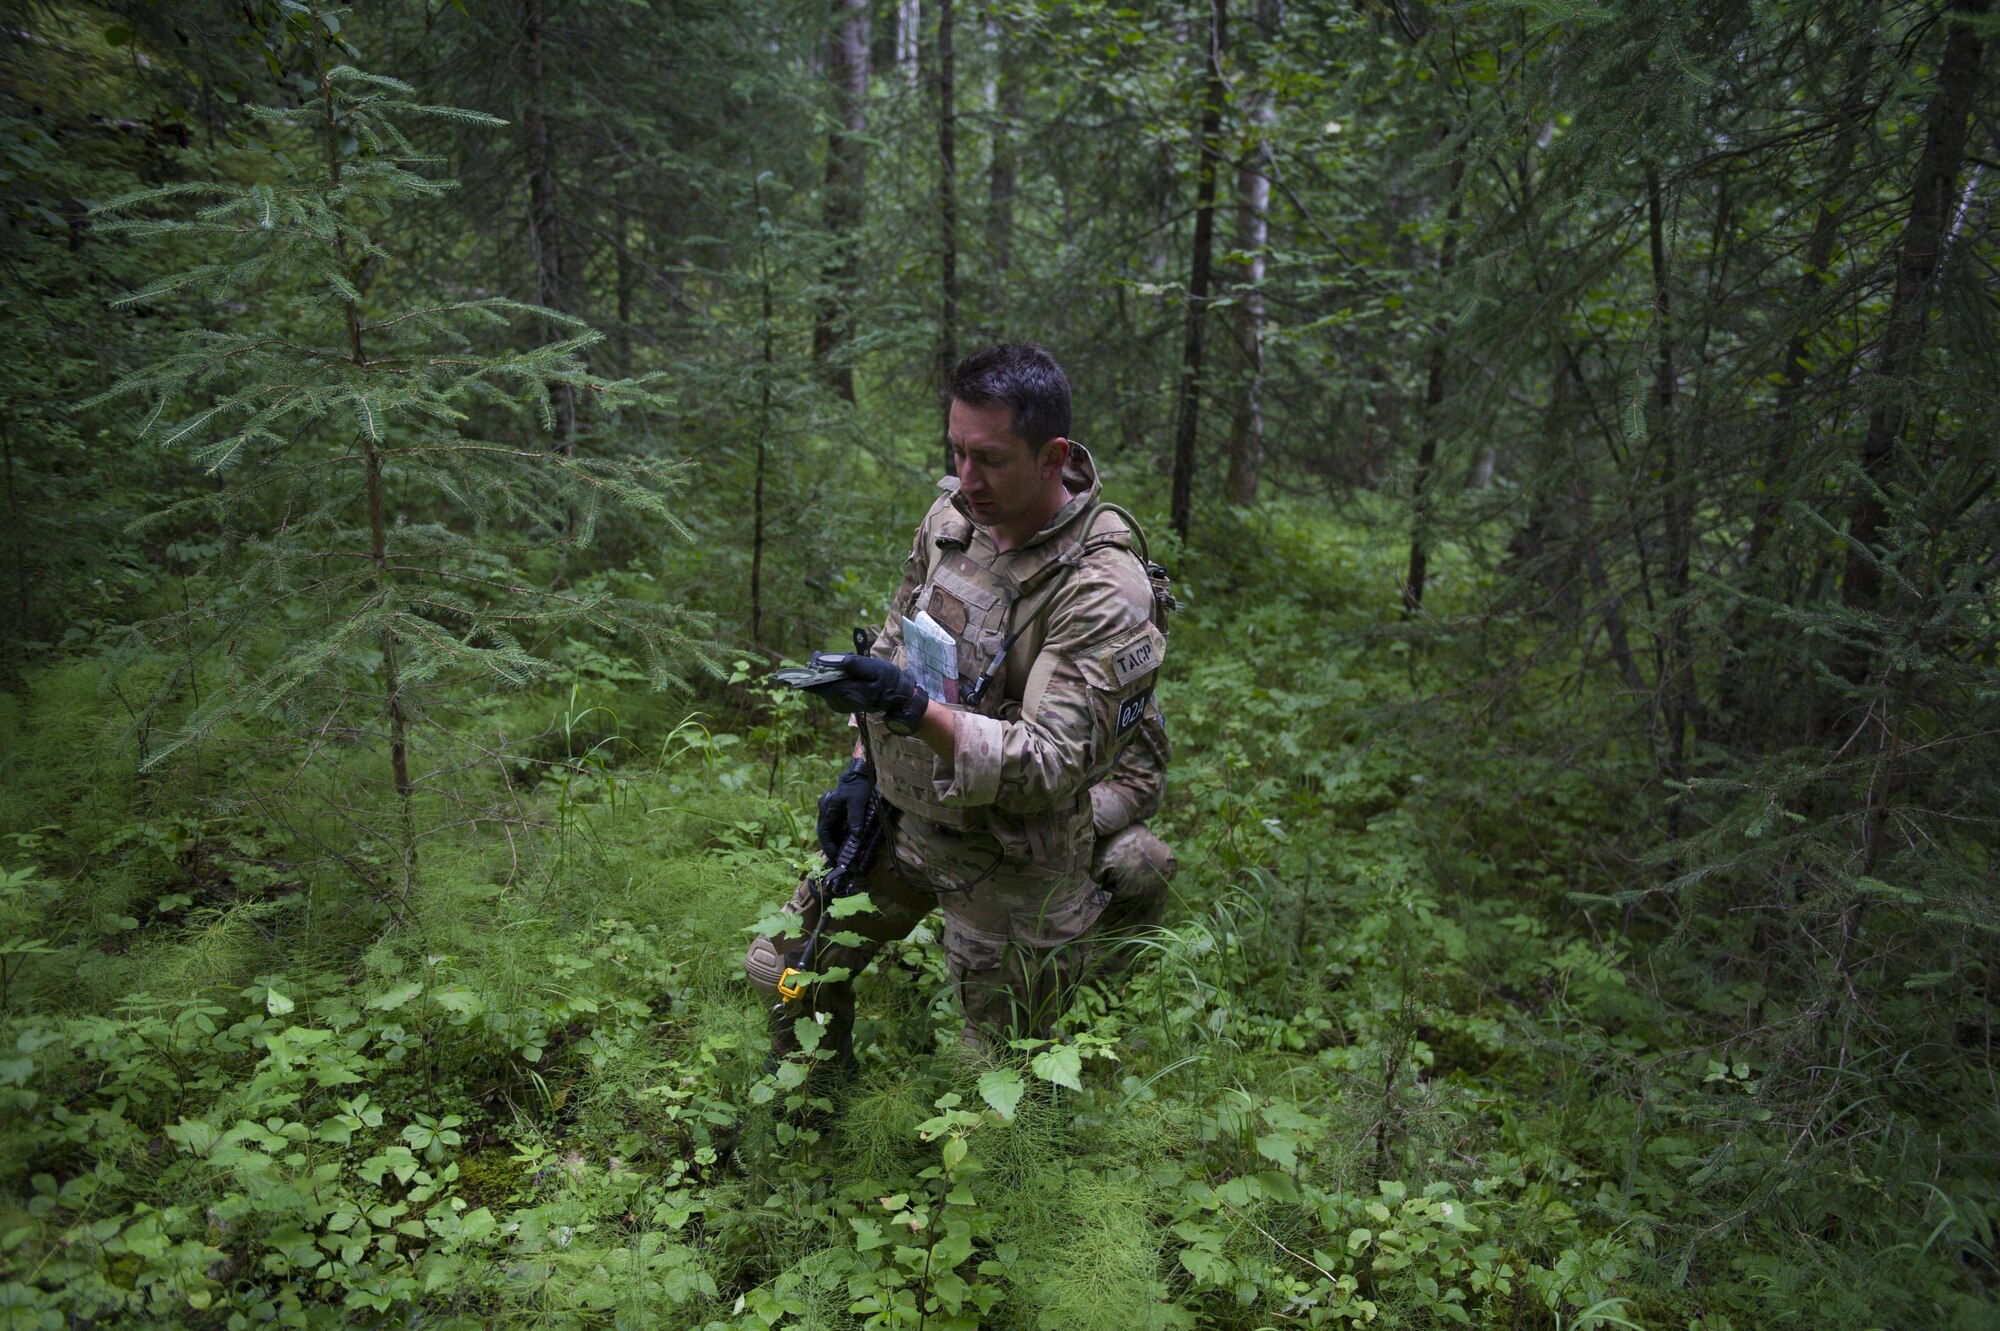 U.S. Air Force Staff Sgt. Kristopher Harpoon, a 5th Air Support Operations Squadron, Joint Base Lewis-McChord, Wash., tactical air control party specialist, checks his compass during the land navigation exercise as part of Cascade Challenge July 19, 2016, at Eielson Air Force Base, Alaska. Competitors were only allowed to use a compass to navigate to their destination. (U.S. Air Force photo by Airman Isaac Johnson)